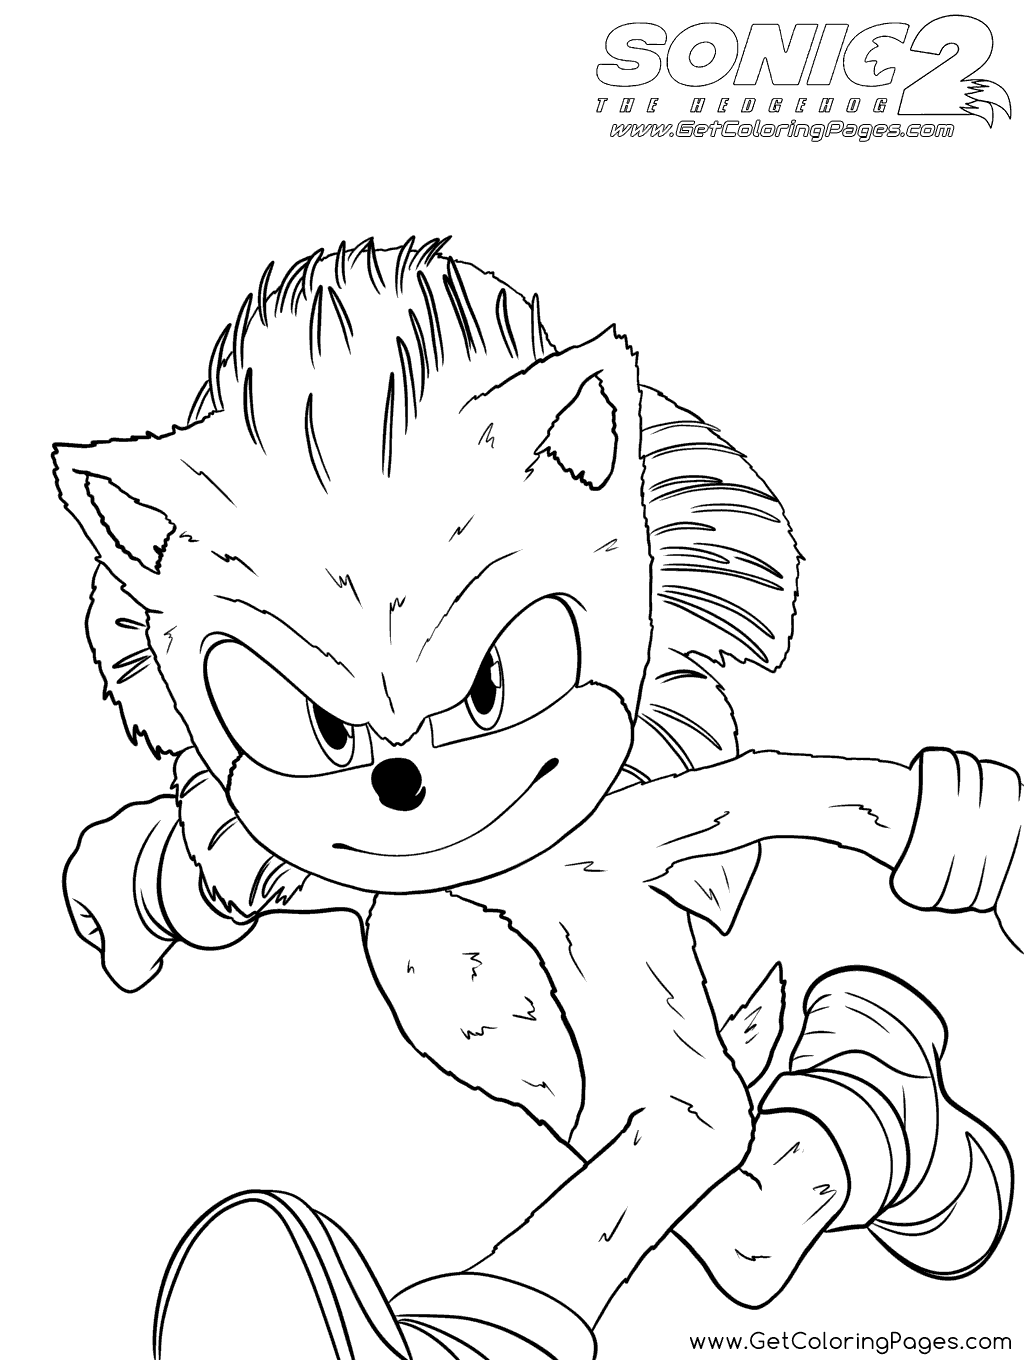 Sonic in Sonic the Hedgehog 2 Coloring Pages - Sonic the Hedgehog 2